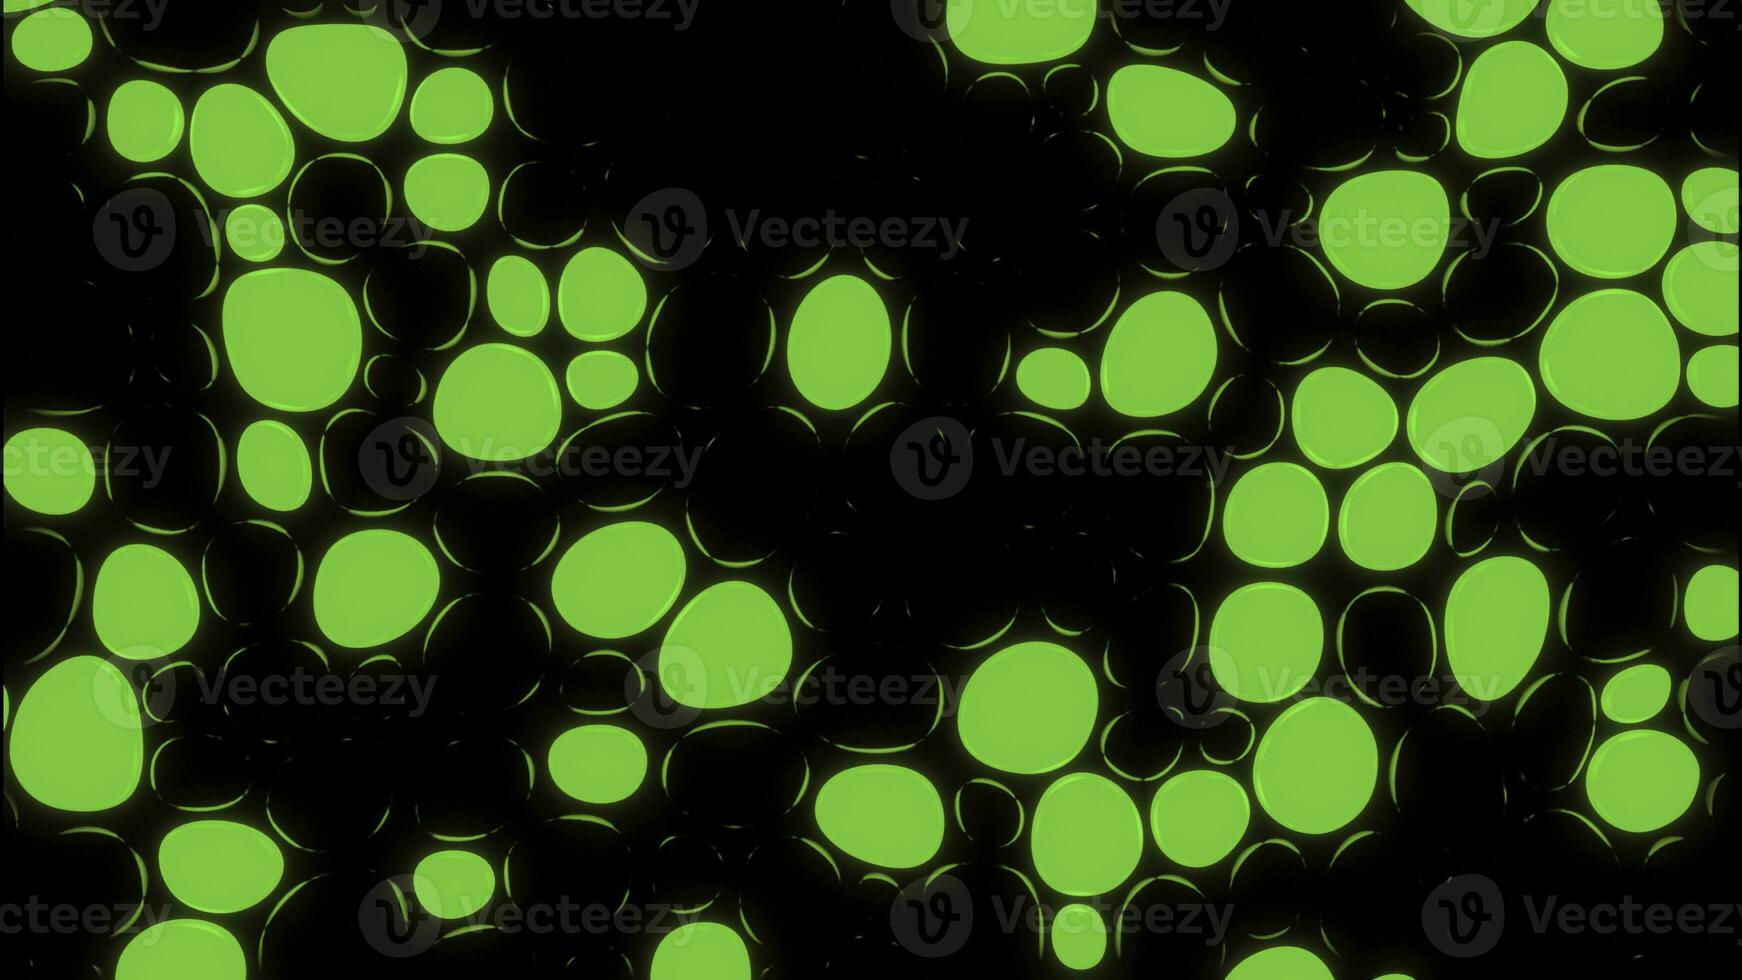 Background with neon flashing circles. Design. Bright neon circles blink on black background. Flashing background with round dots in retro electro pattern photo